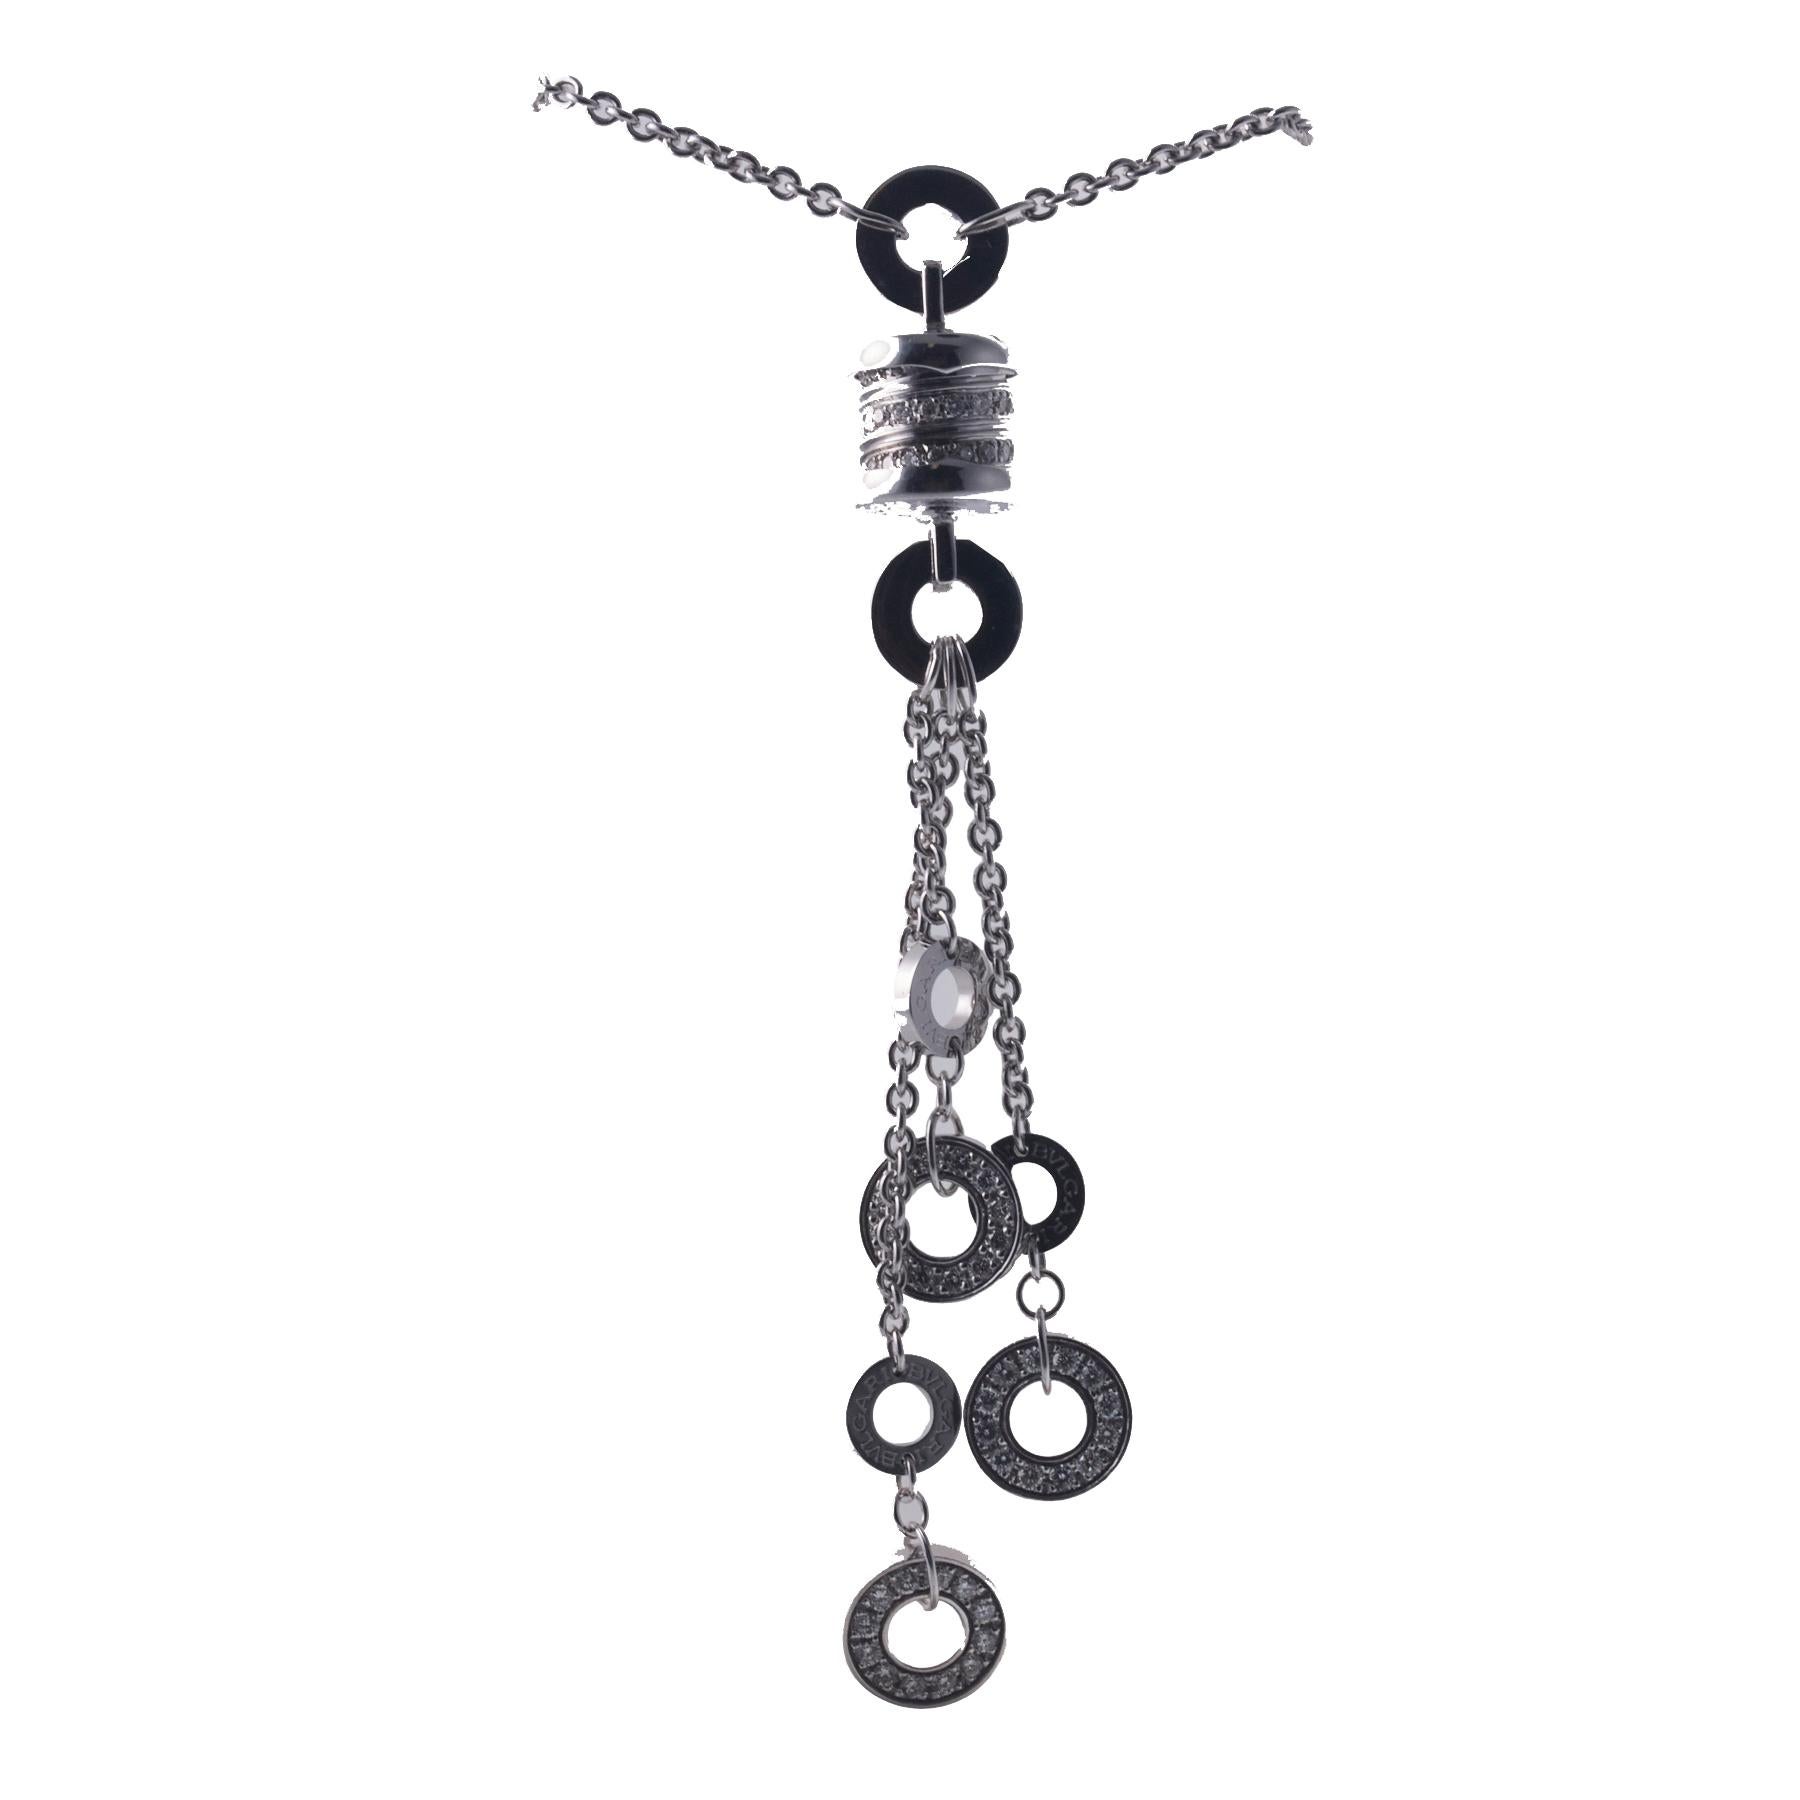 Bvlgari B.Zero collection drop necklace in 18k white gold, set with approx. 1.65ctw in VS/G diamonds. Necklace measures 17.5